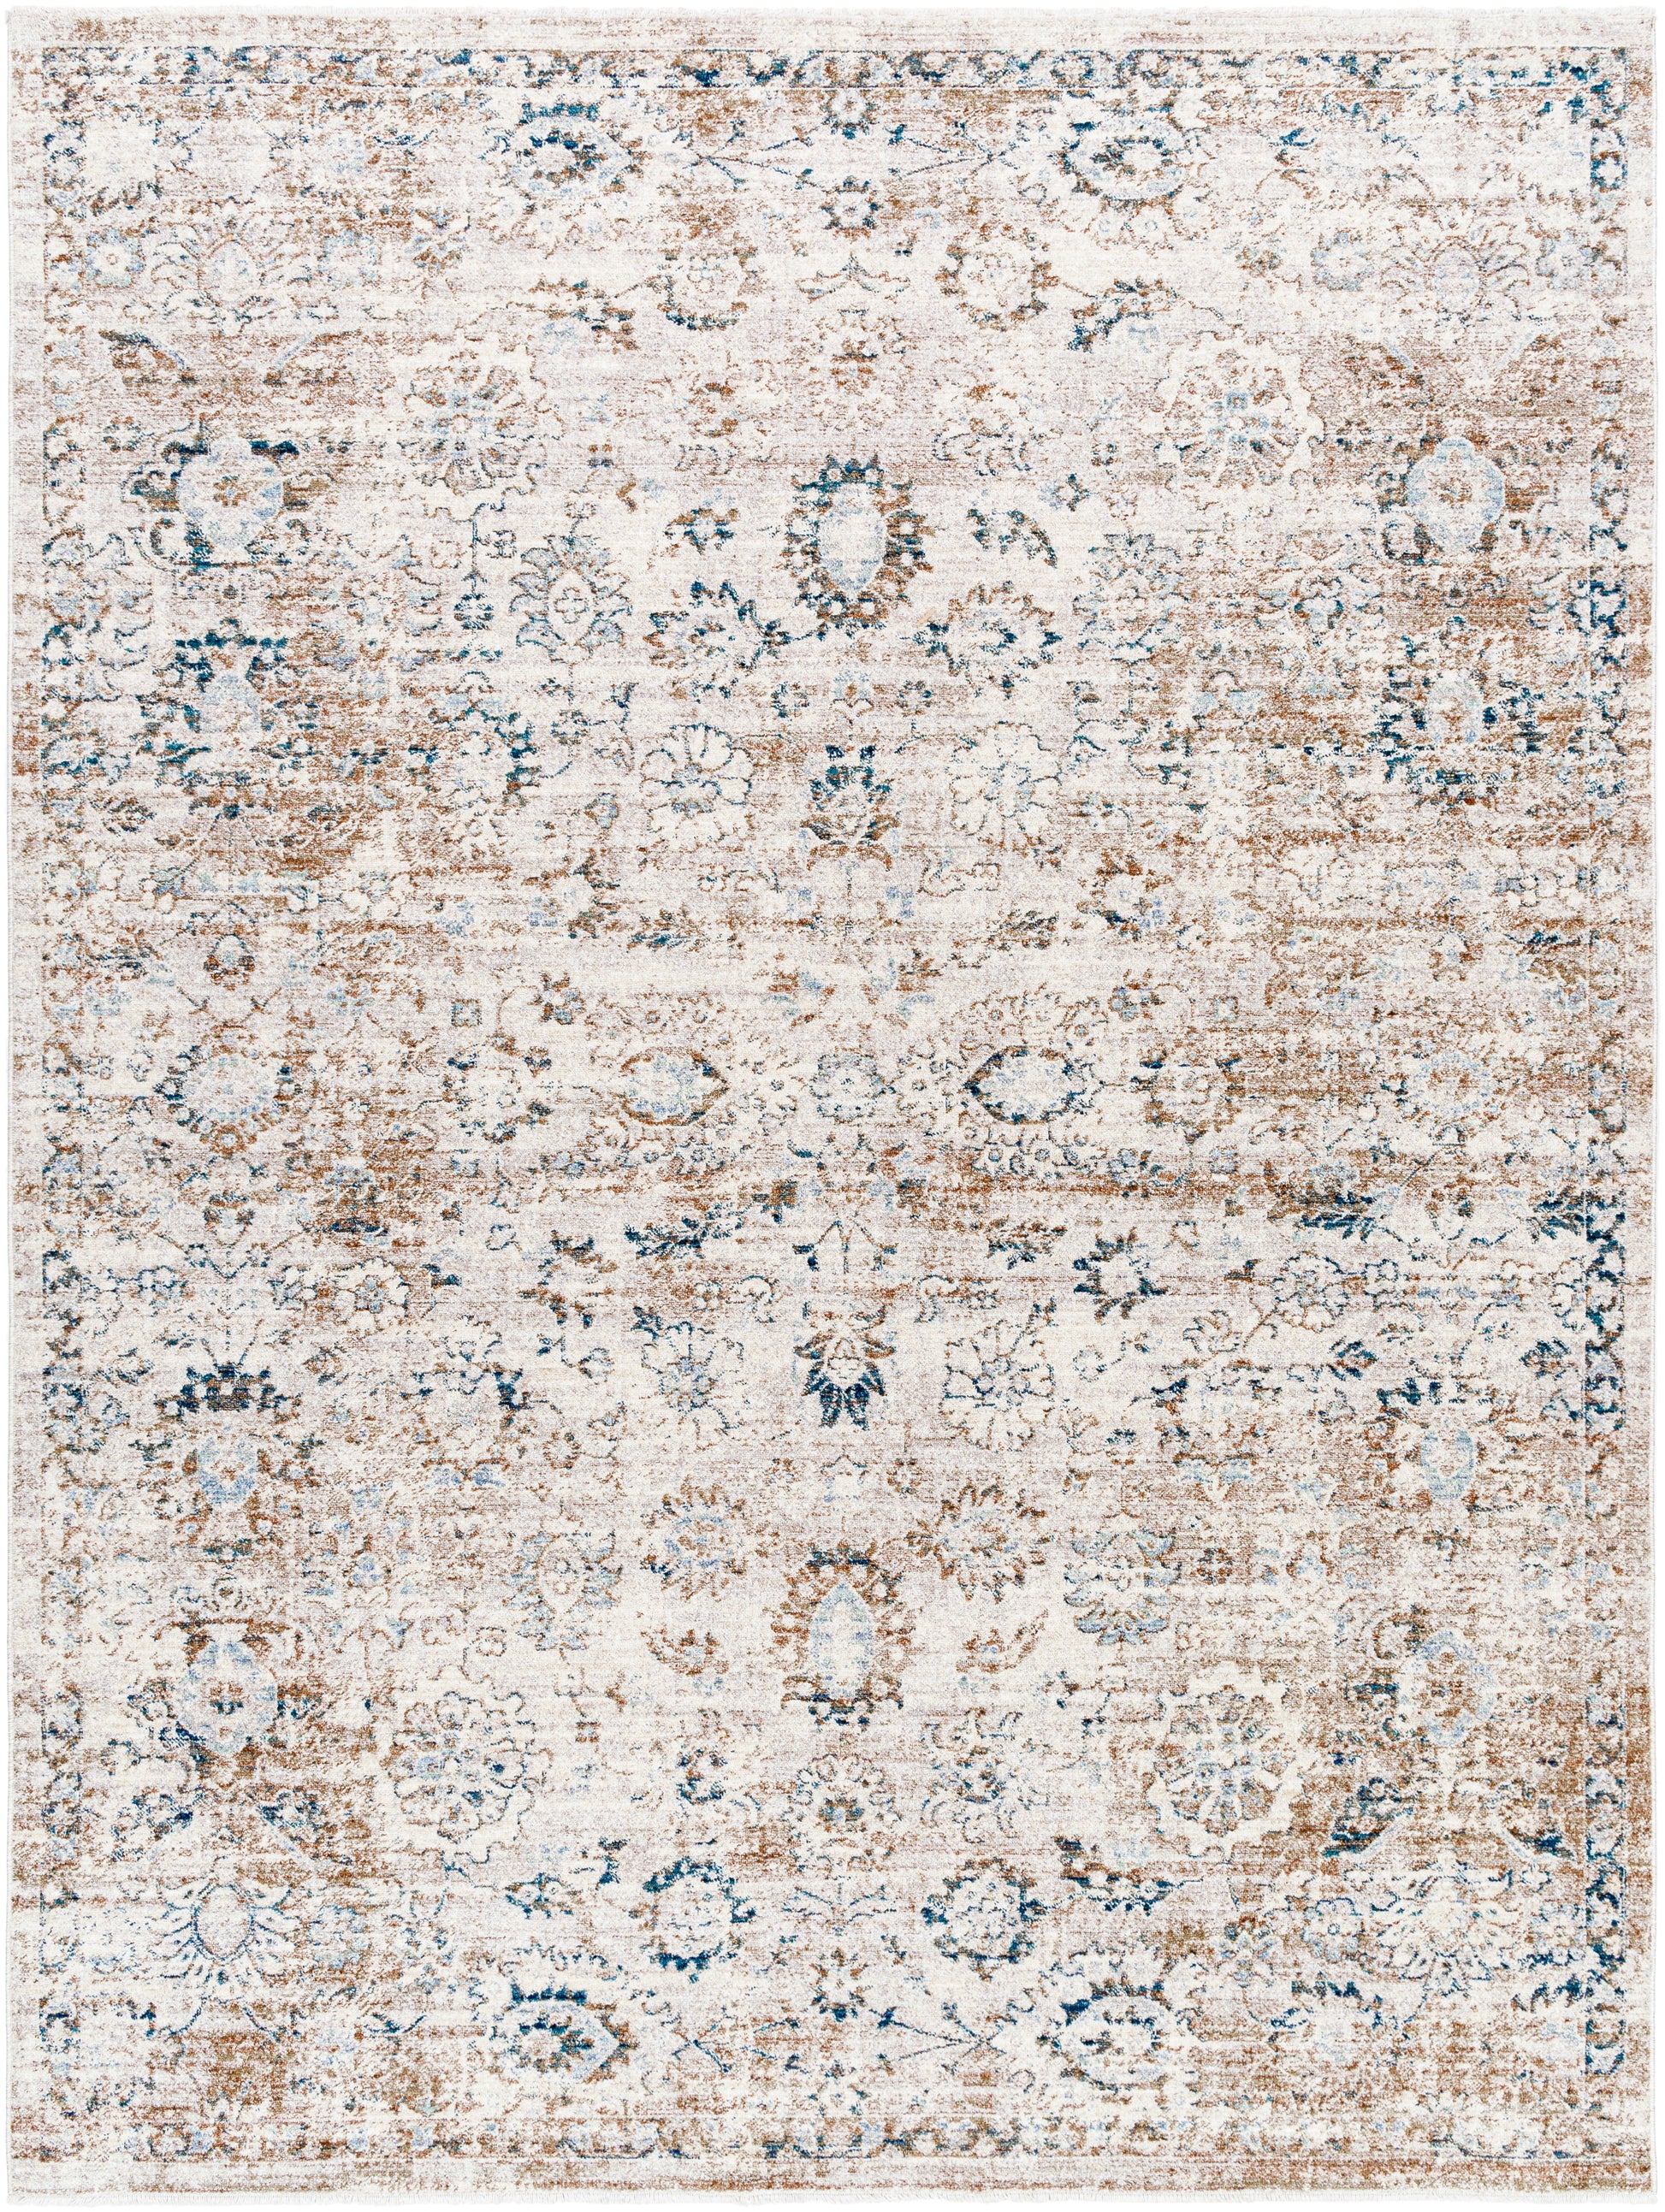 Surya Montreal Mtr-2304 Taupe, Cream, Gray, Teal, Dusty Sage Area Rug